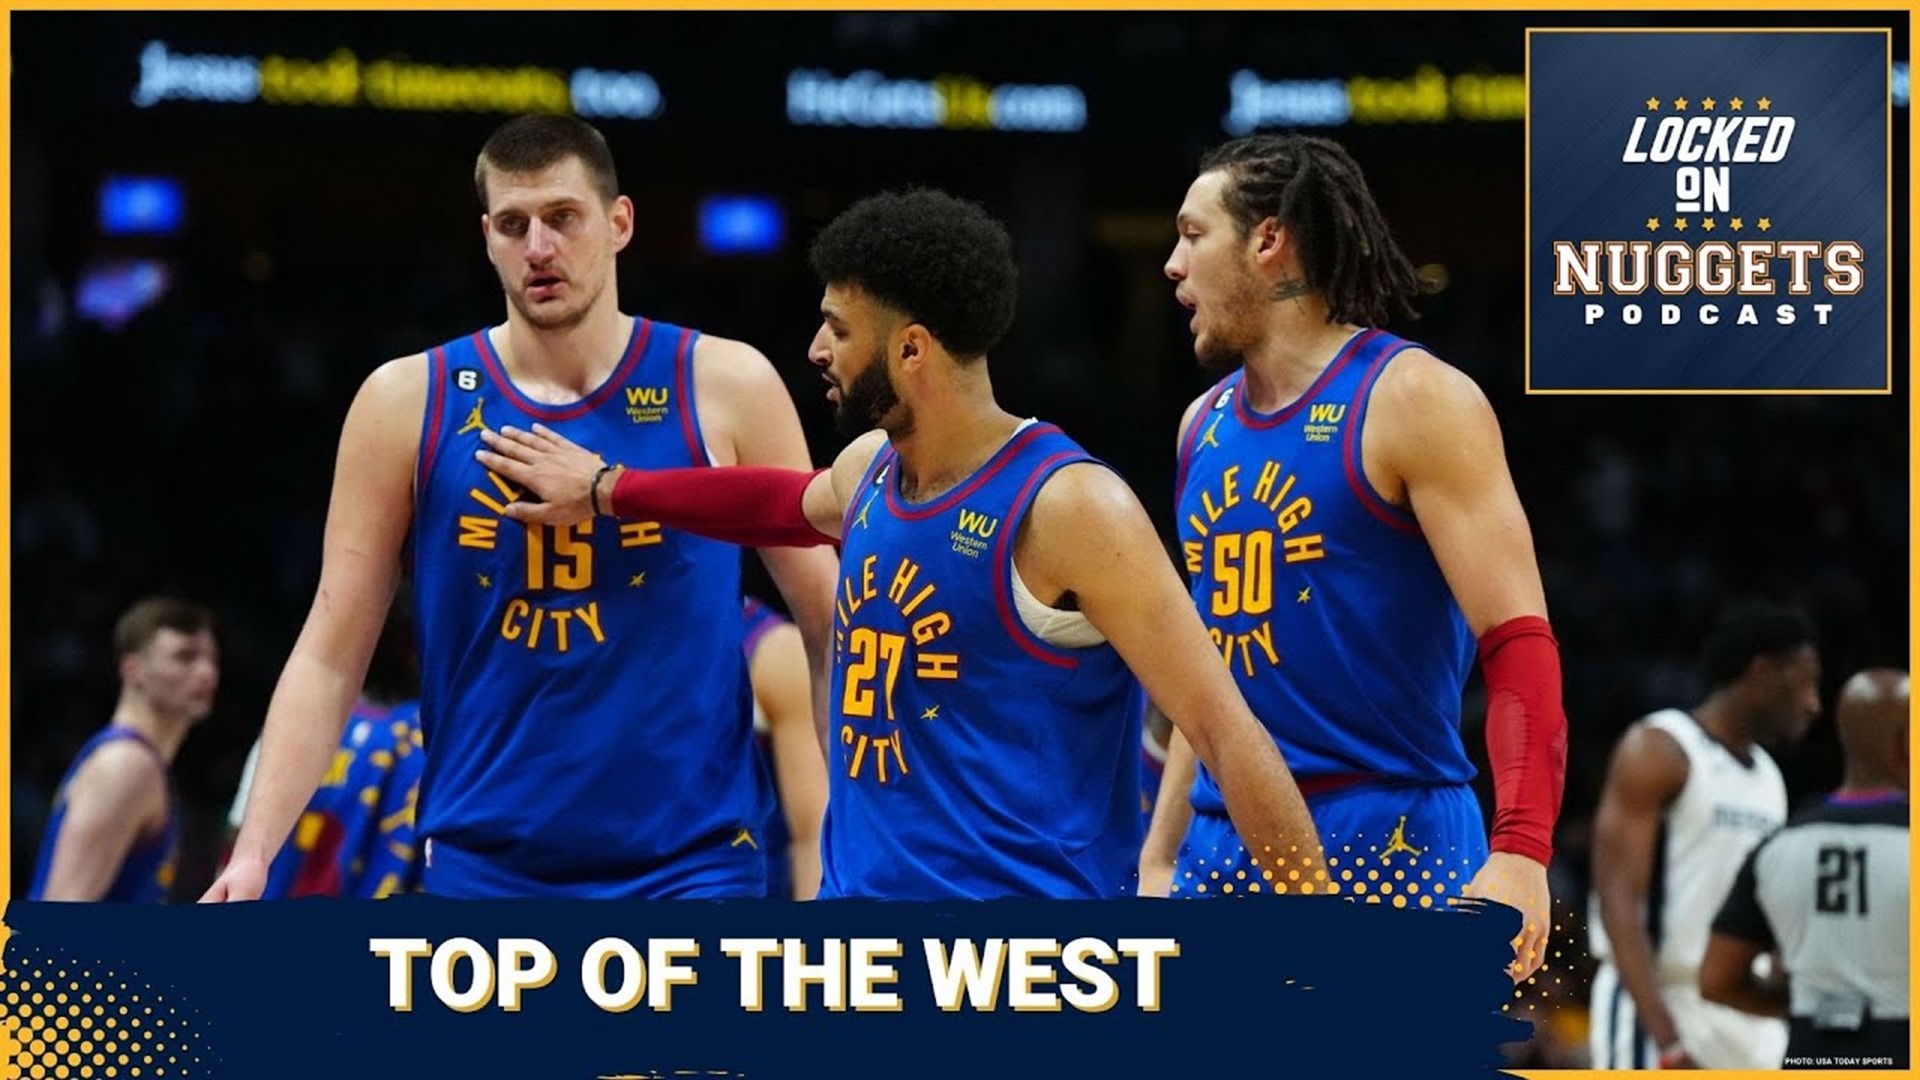 With the Nuggets securing the No.1 seed and homecourt throughout the NBA Western Conference Playoffs, what does that mean for their chances at reaching the Finals?